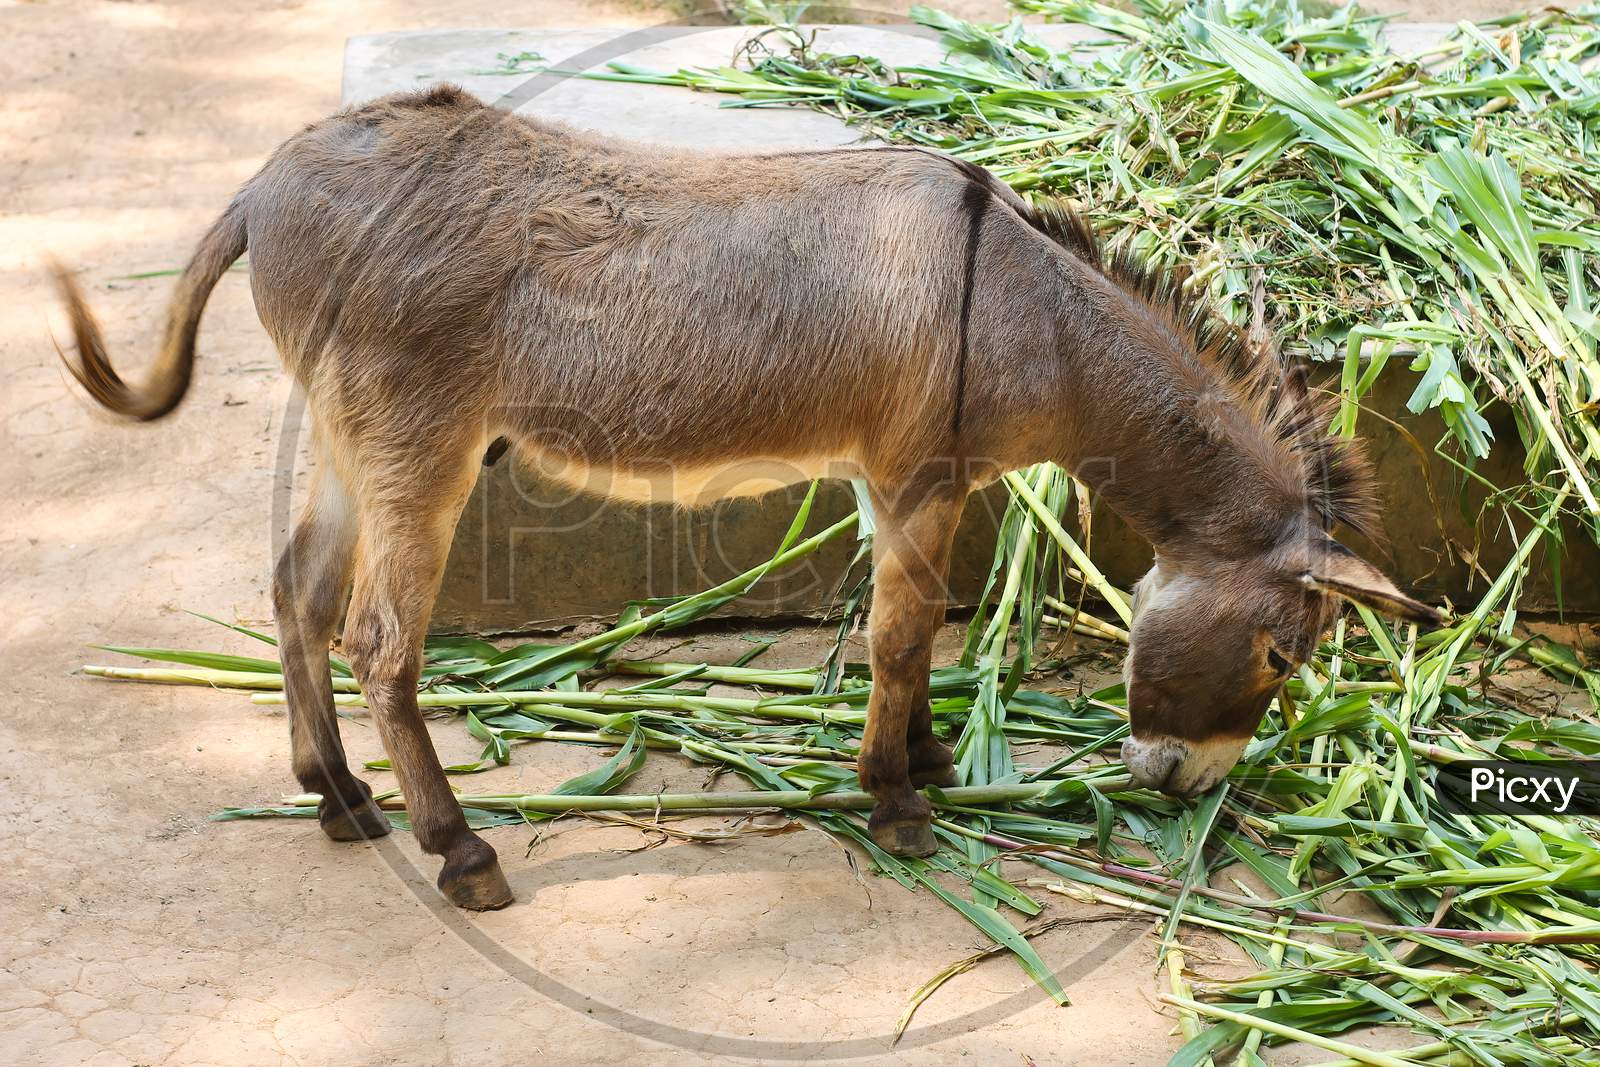 A Young Donkey Eating Green Grass In Natural Light